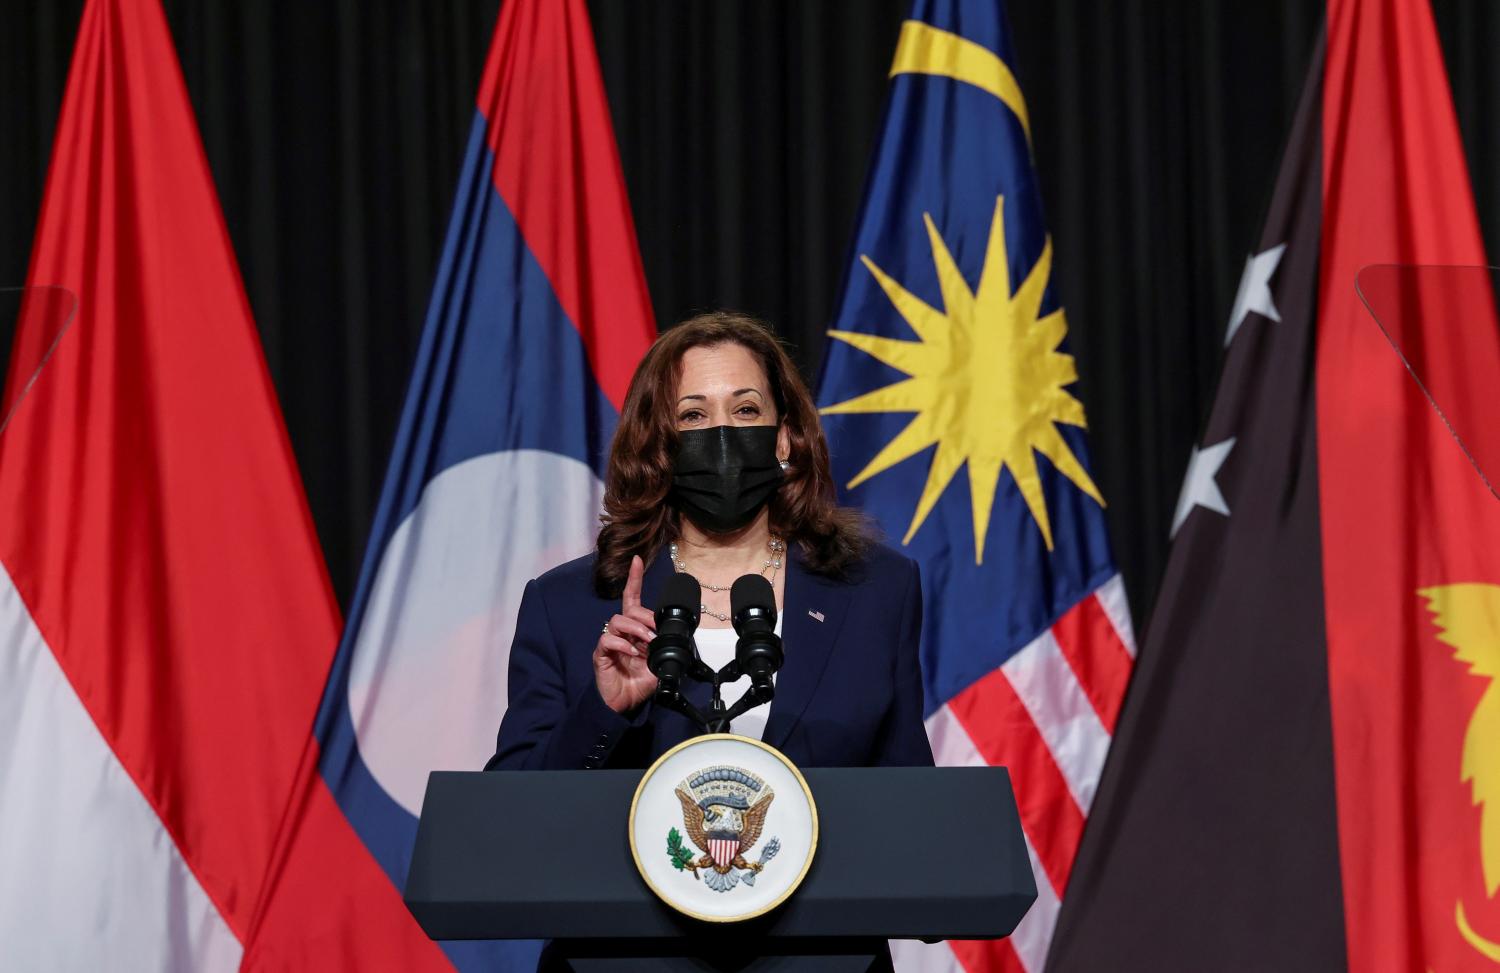 U.S. Vice President Kamala Harris delivers remarks during the official launch of the CDC Southeast Asia Regional Office in Hanoi, Vietnam, August, 25, 2021. REUTERS/Evelyn Hockstein/Pool